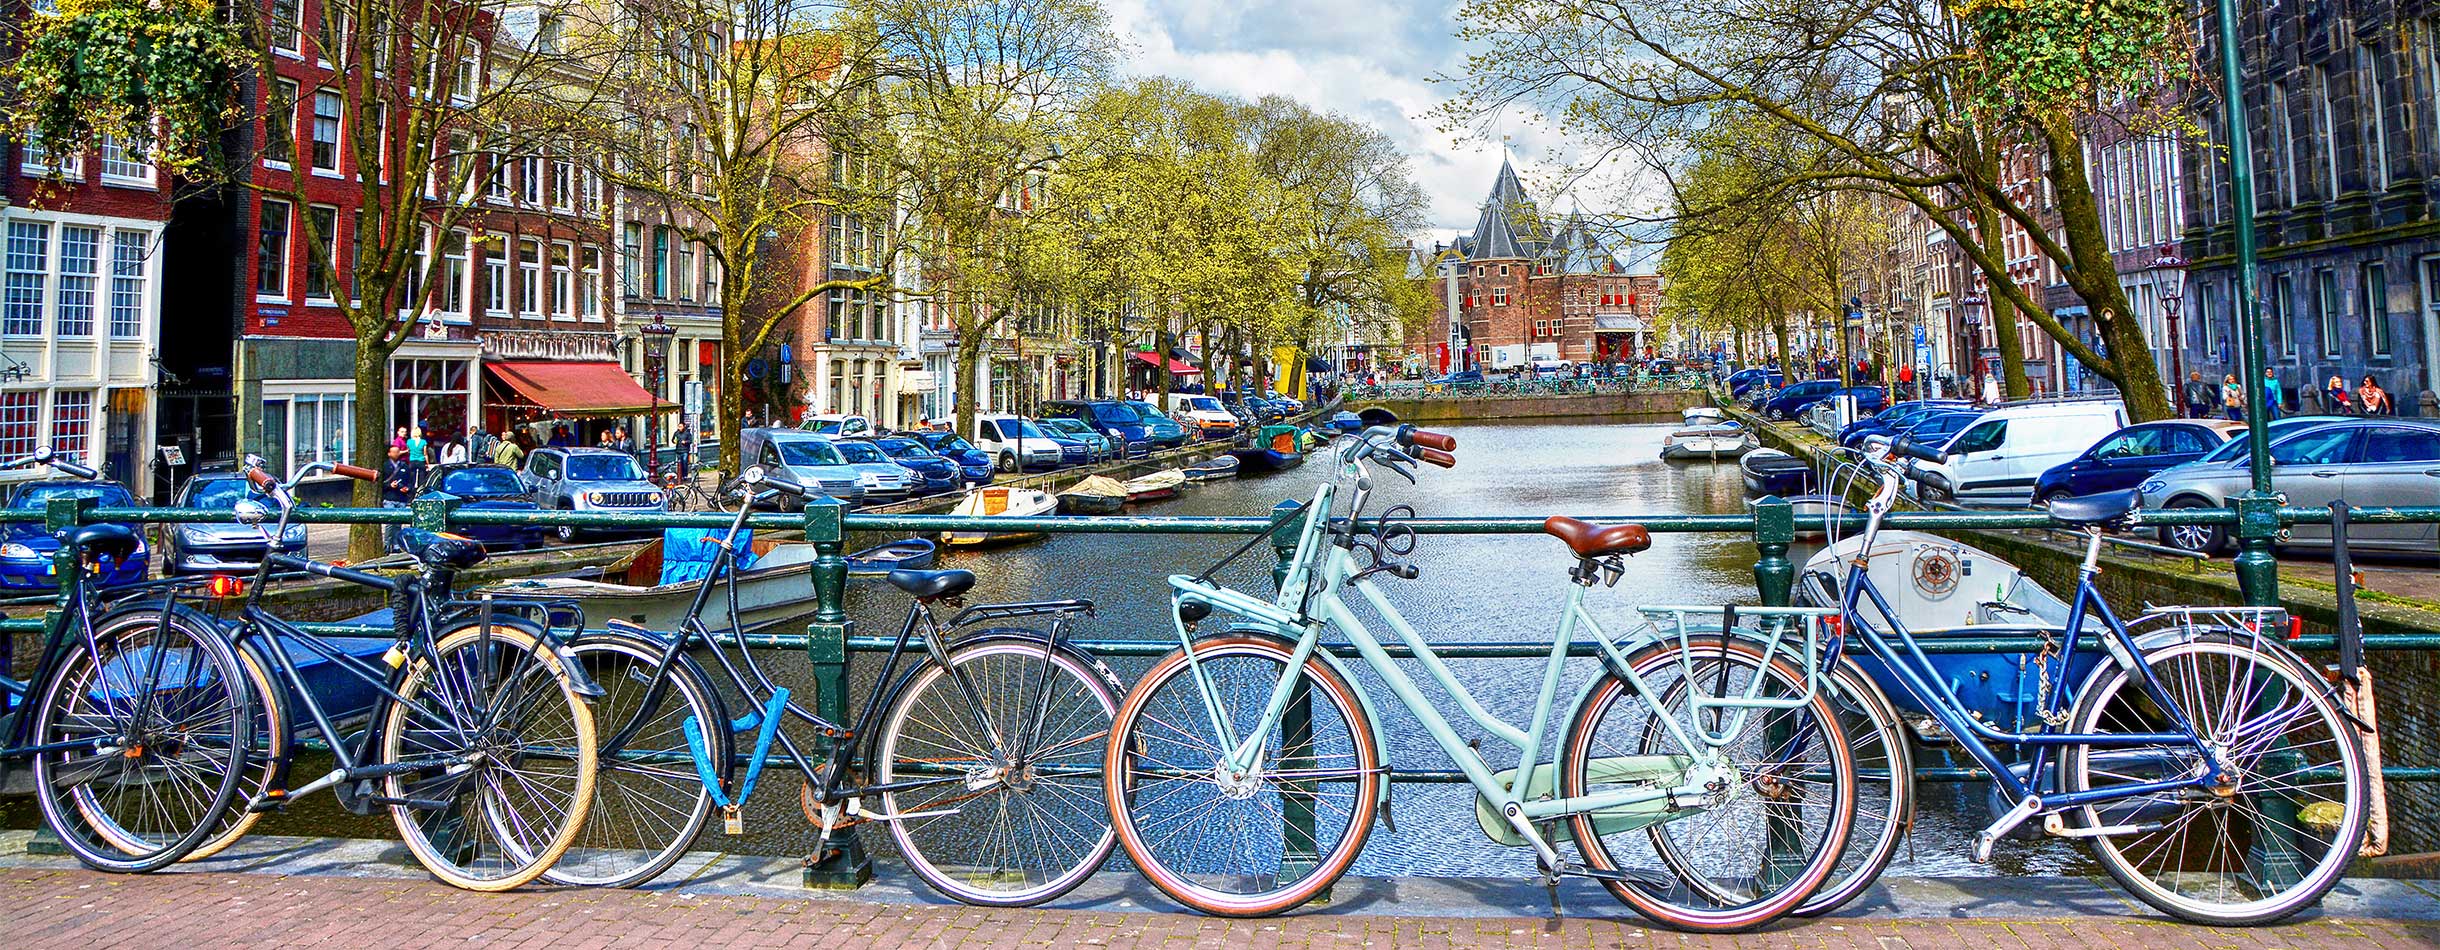 Cruise to Amsterdam and canal cruises, historic landmarks, and the city's vibrant culture 